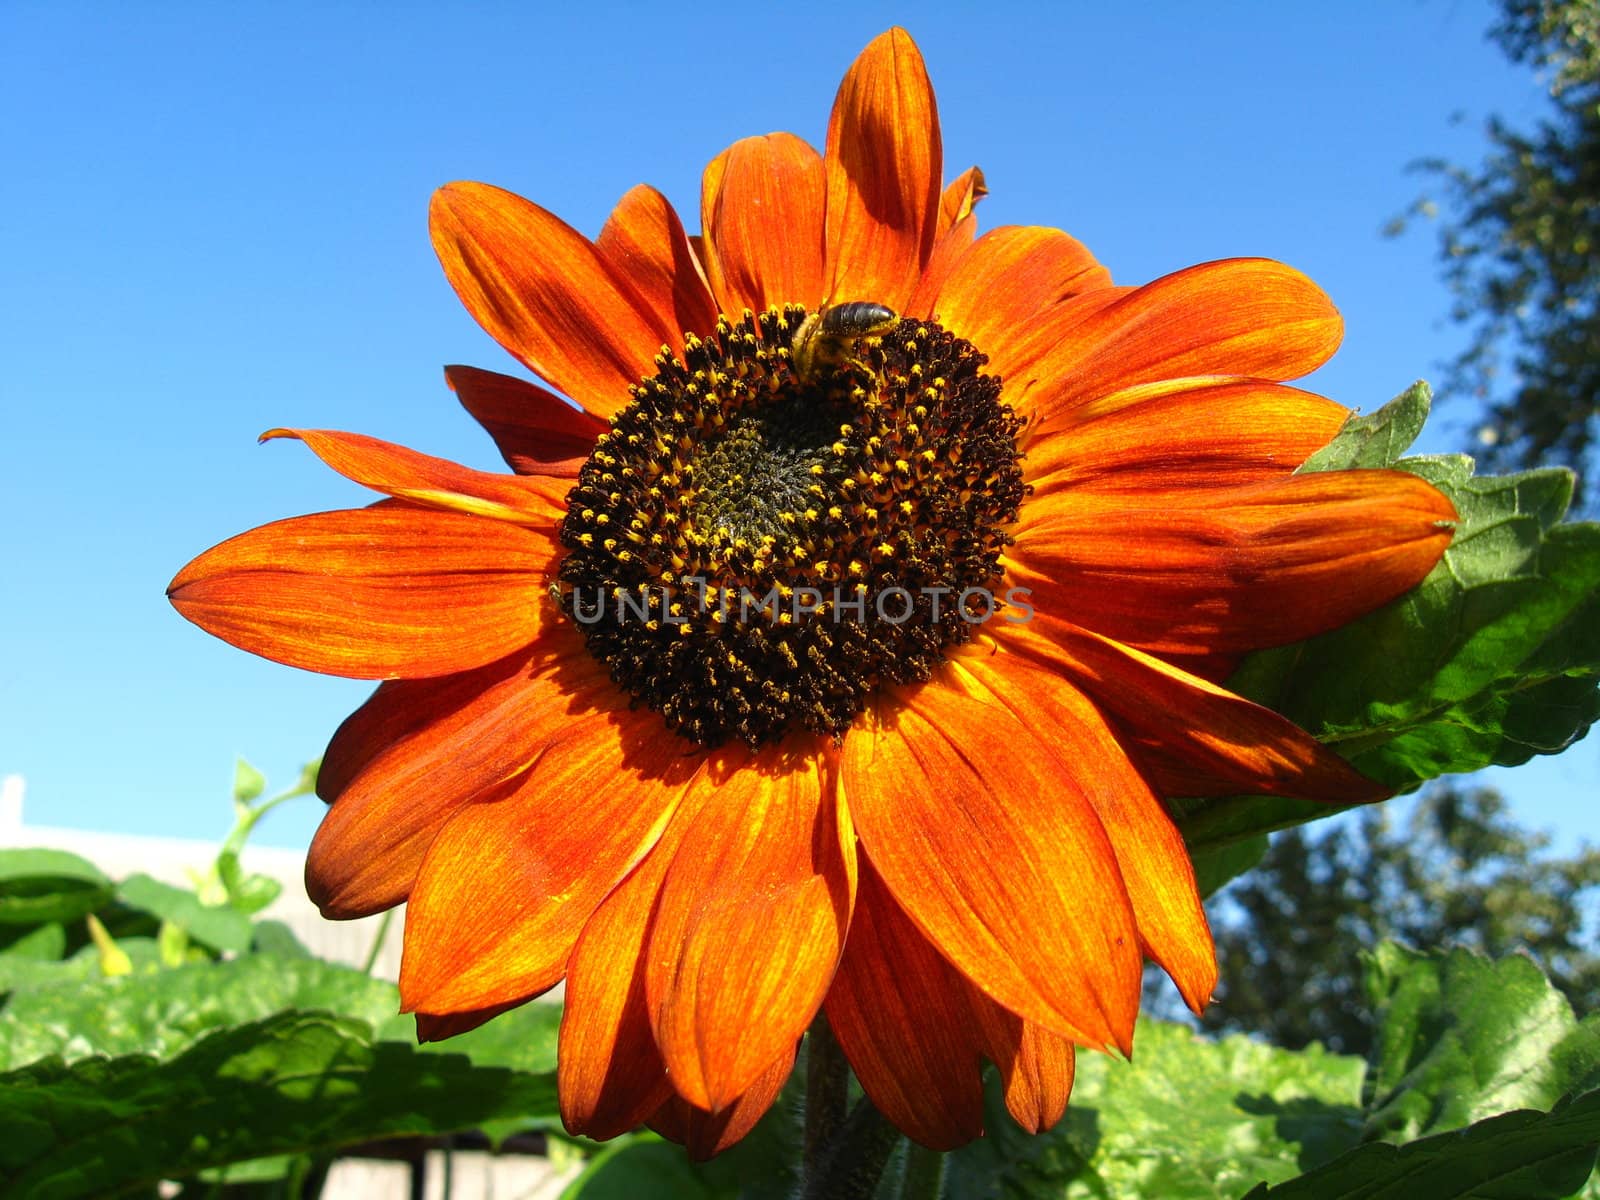 a little bee on the beautiful sunflower